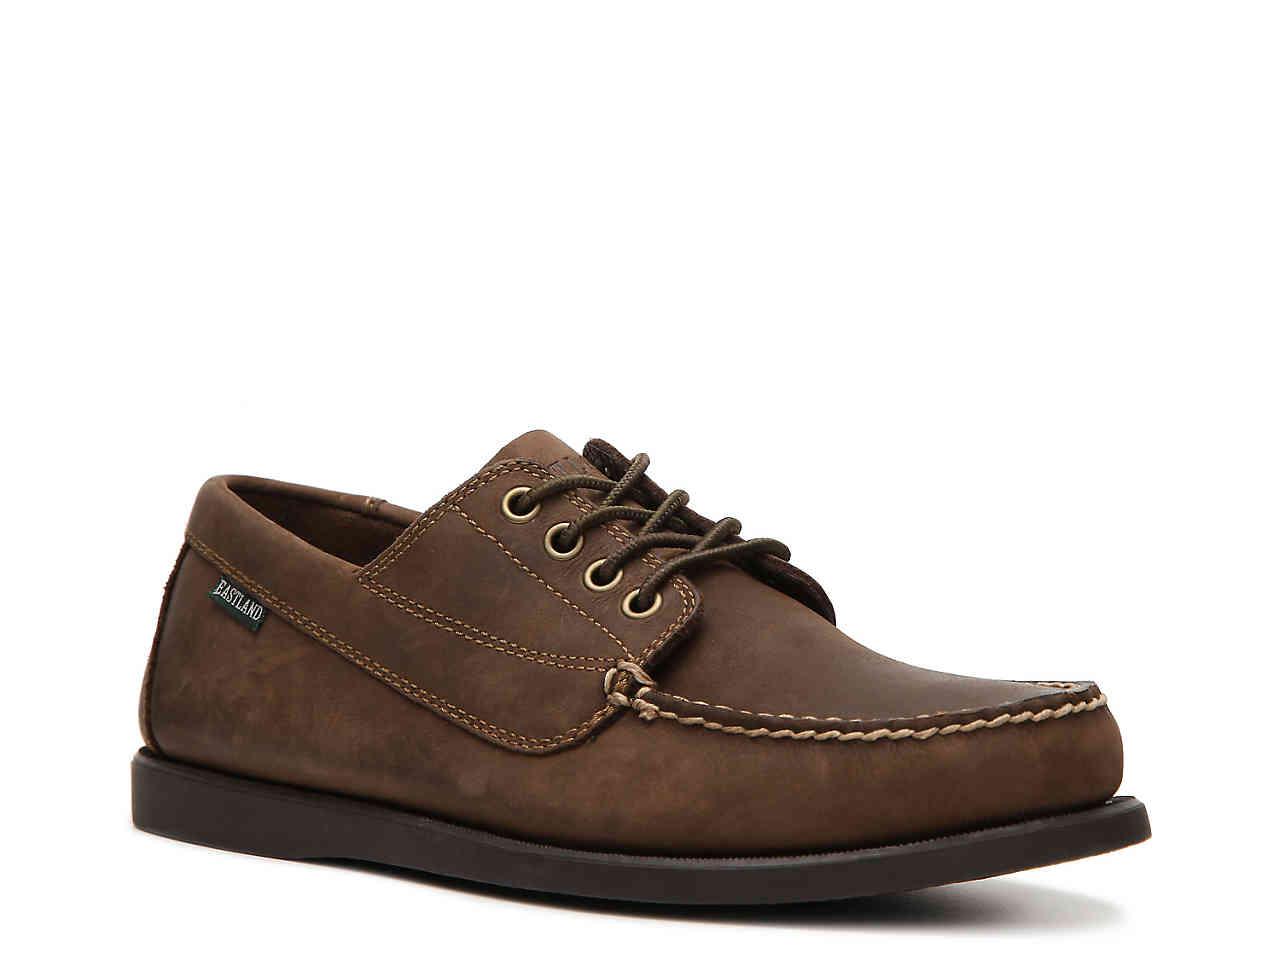 Eastland Leather Falmouth Boat Shoe in Brown for Men - Lyst